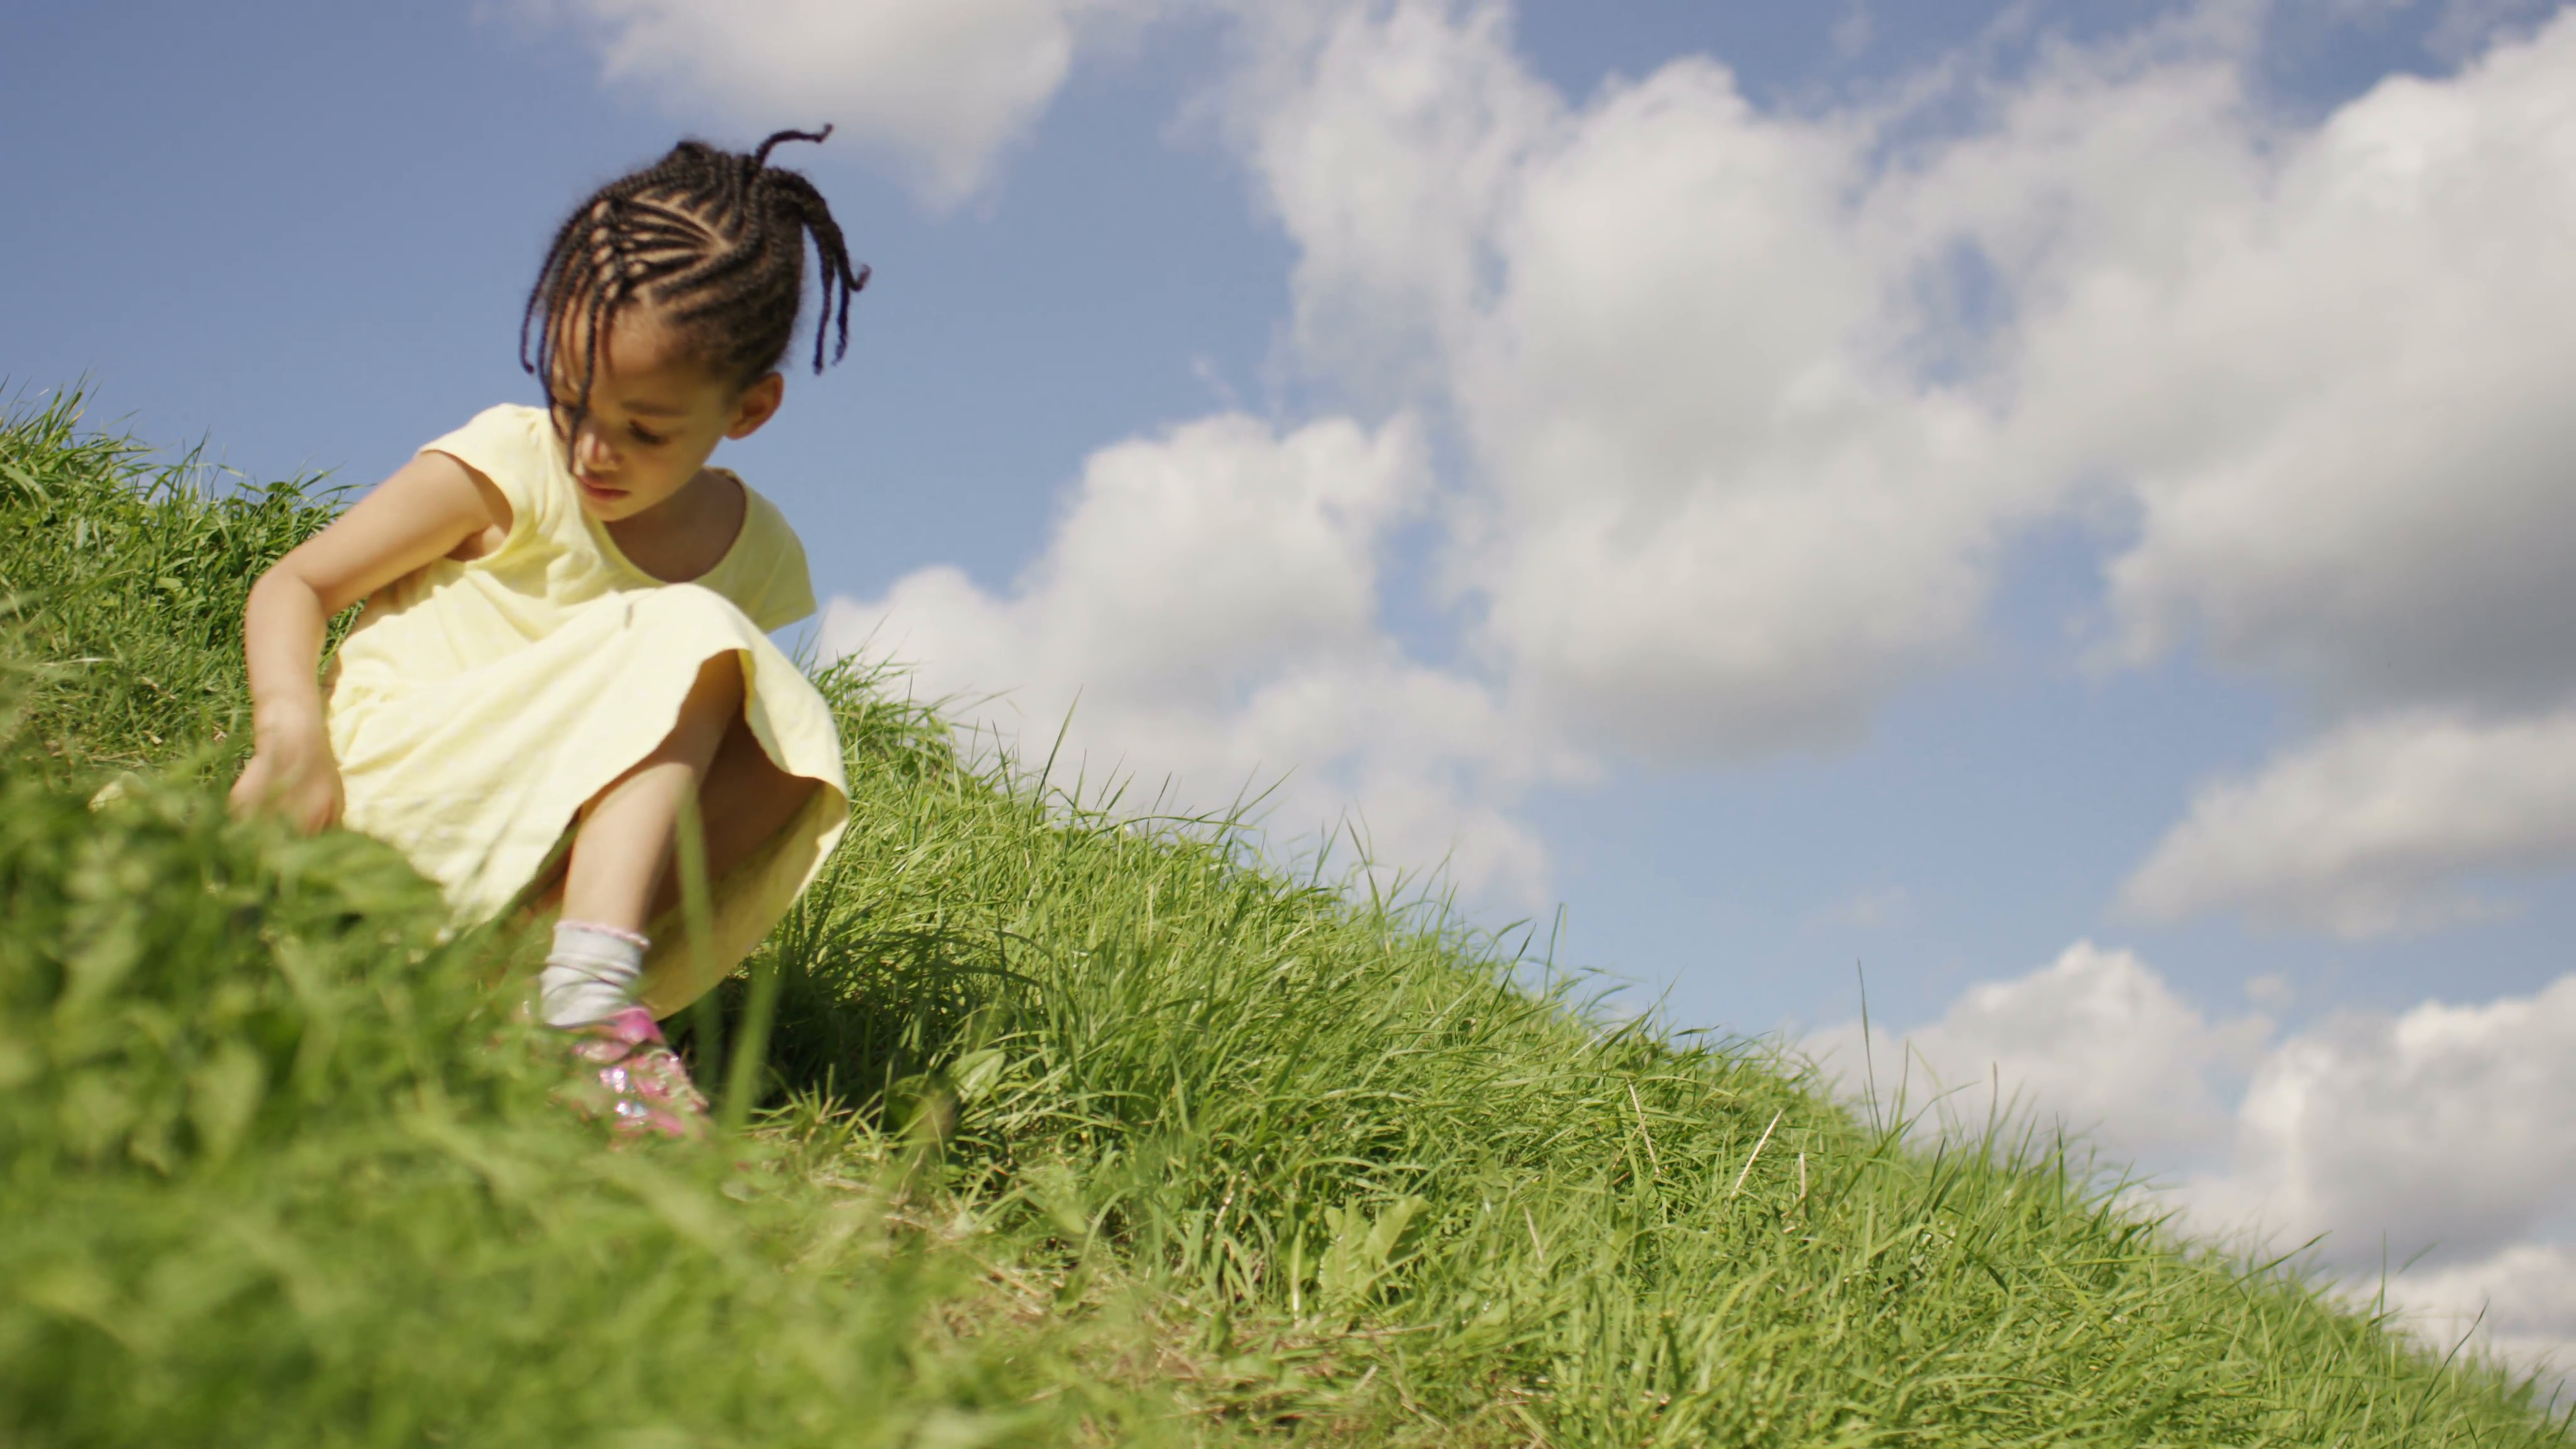 Bright Sunny Day Png - 4K Little Girl On A Hill On A Bright Sunny Day, In Slow Motion, Shot On Red Epic Dragon Stock Video Footage   Videoblocks, Transparent background PNG HD thumbnail